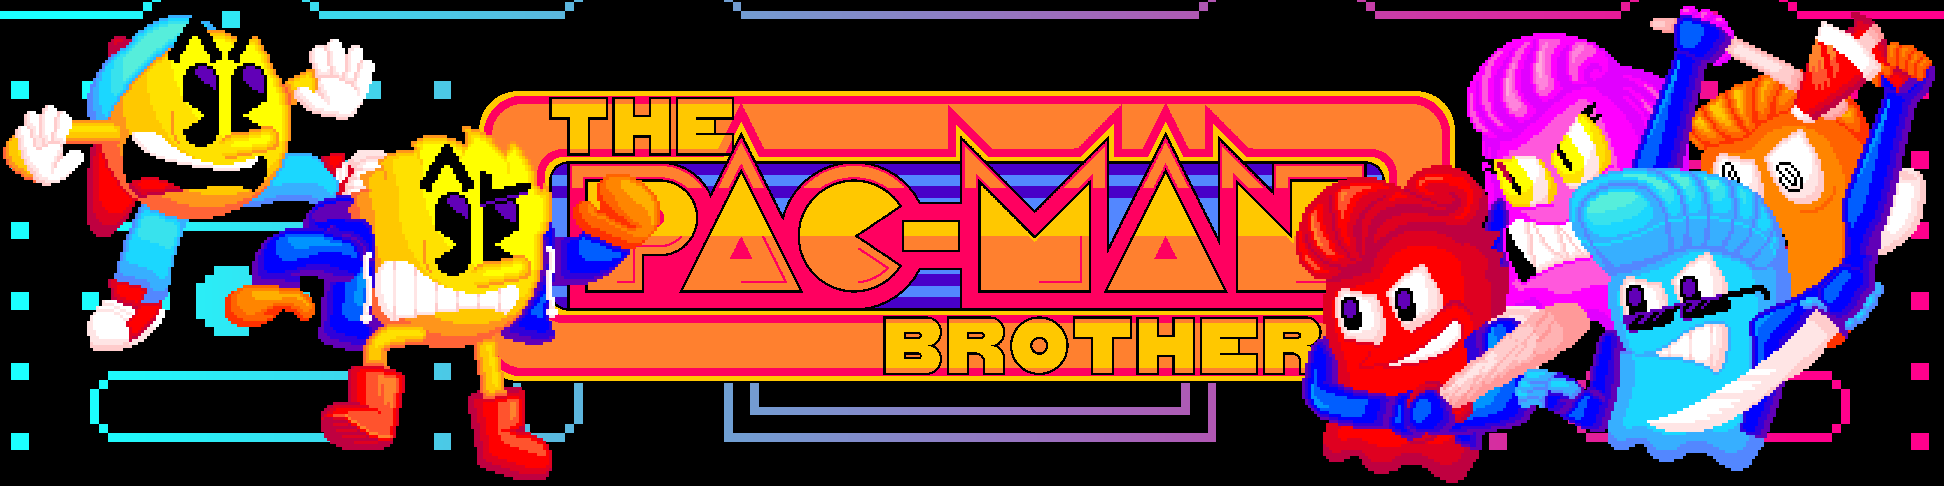 The Pac-Man Brothers